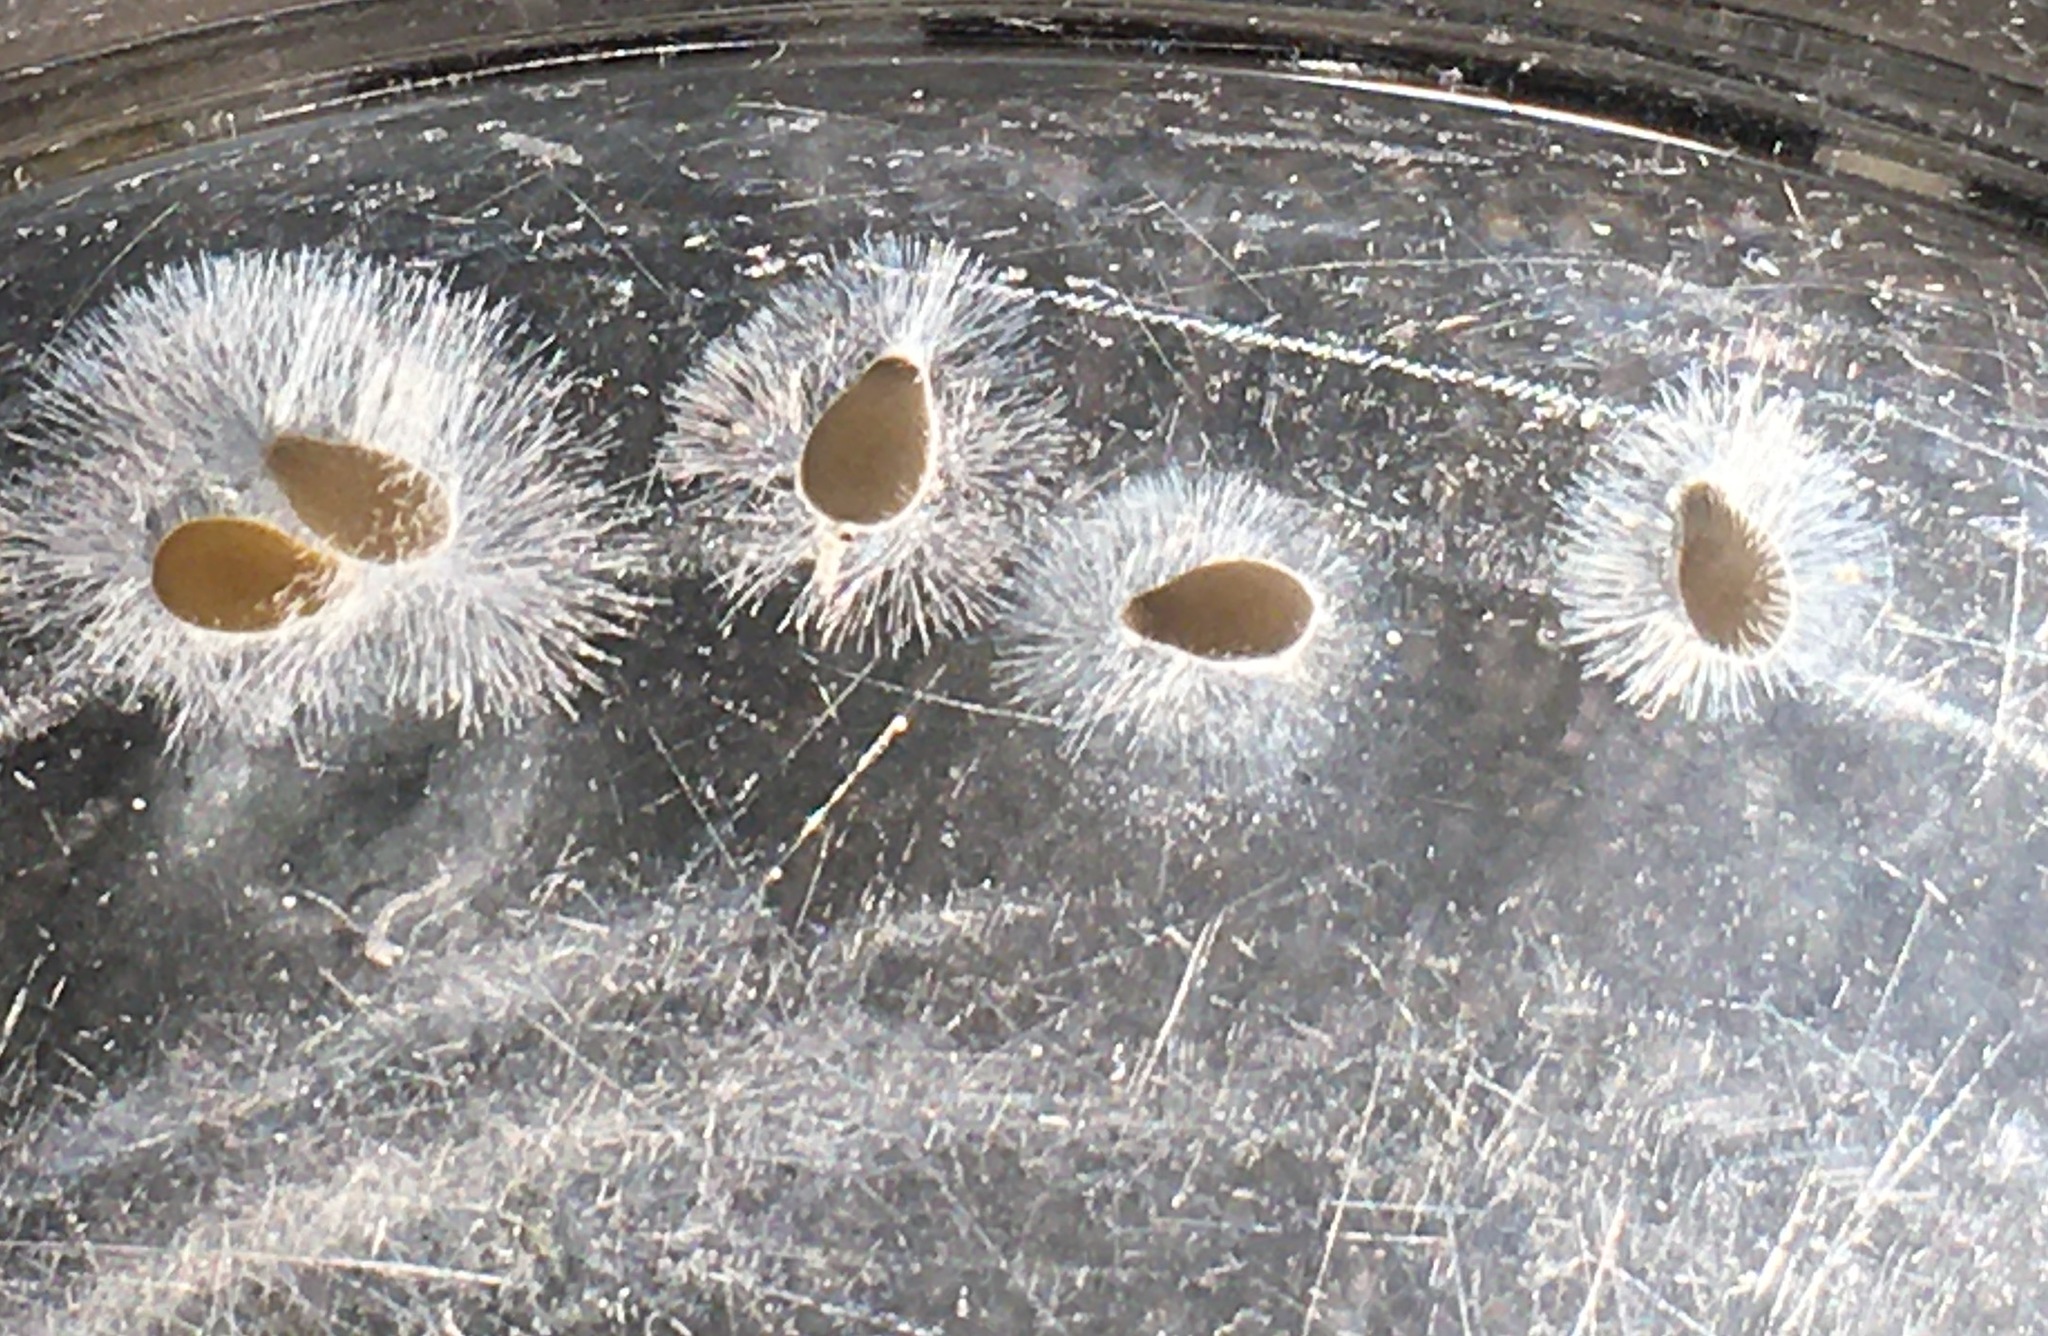 seeds floating in water, covered by fuzzy white hyphae